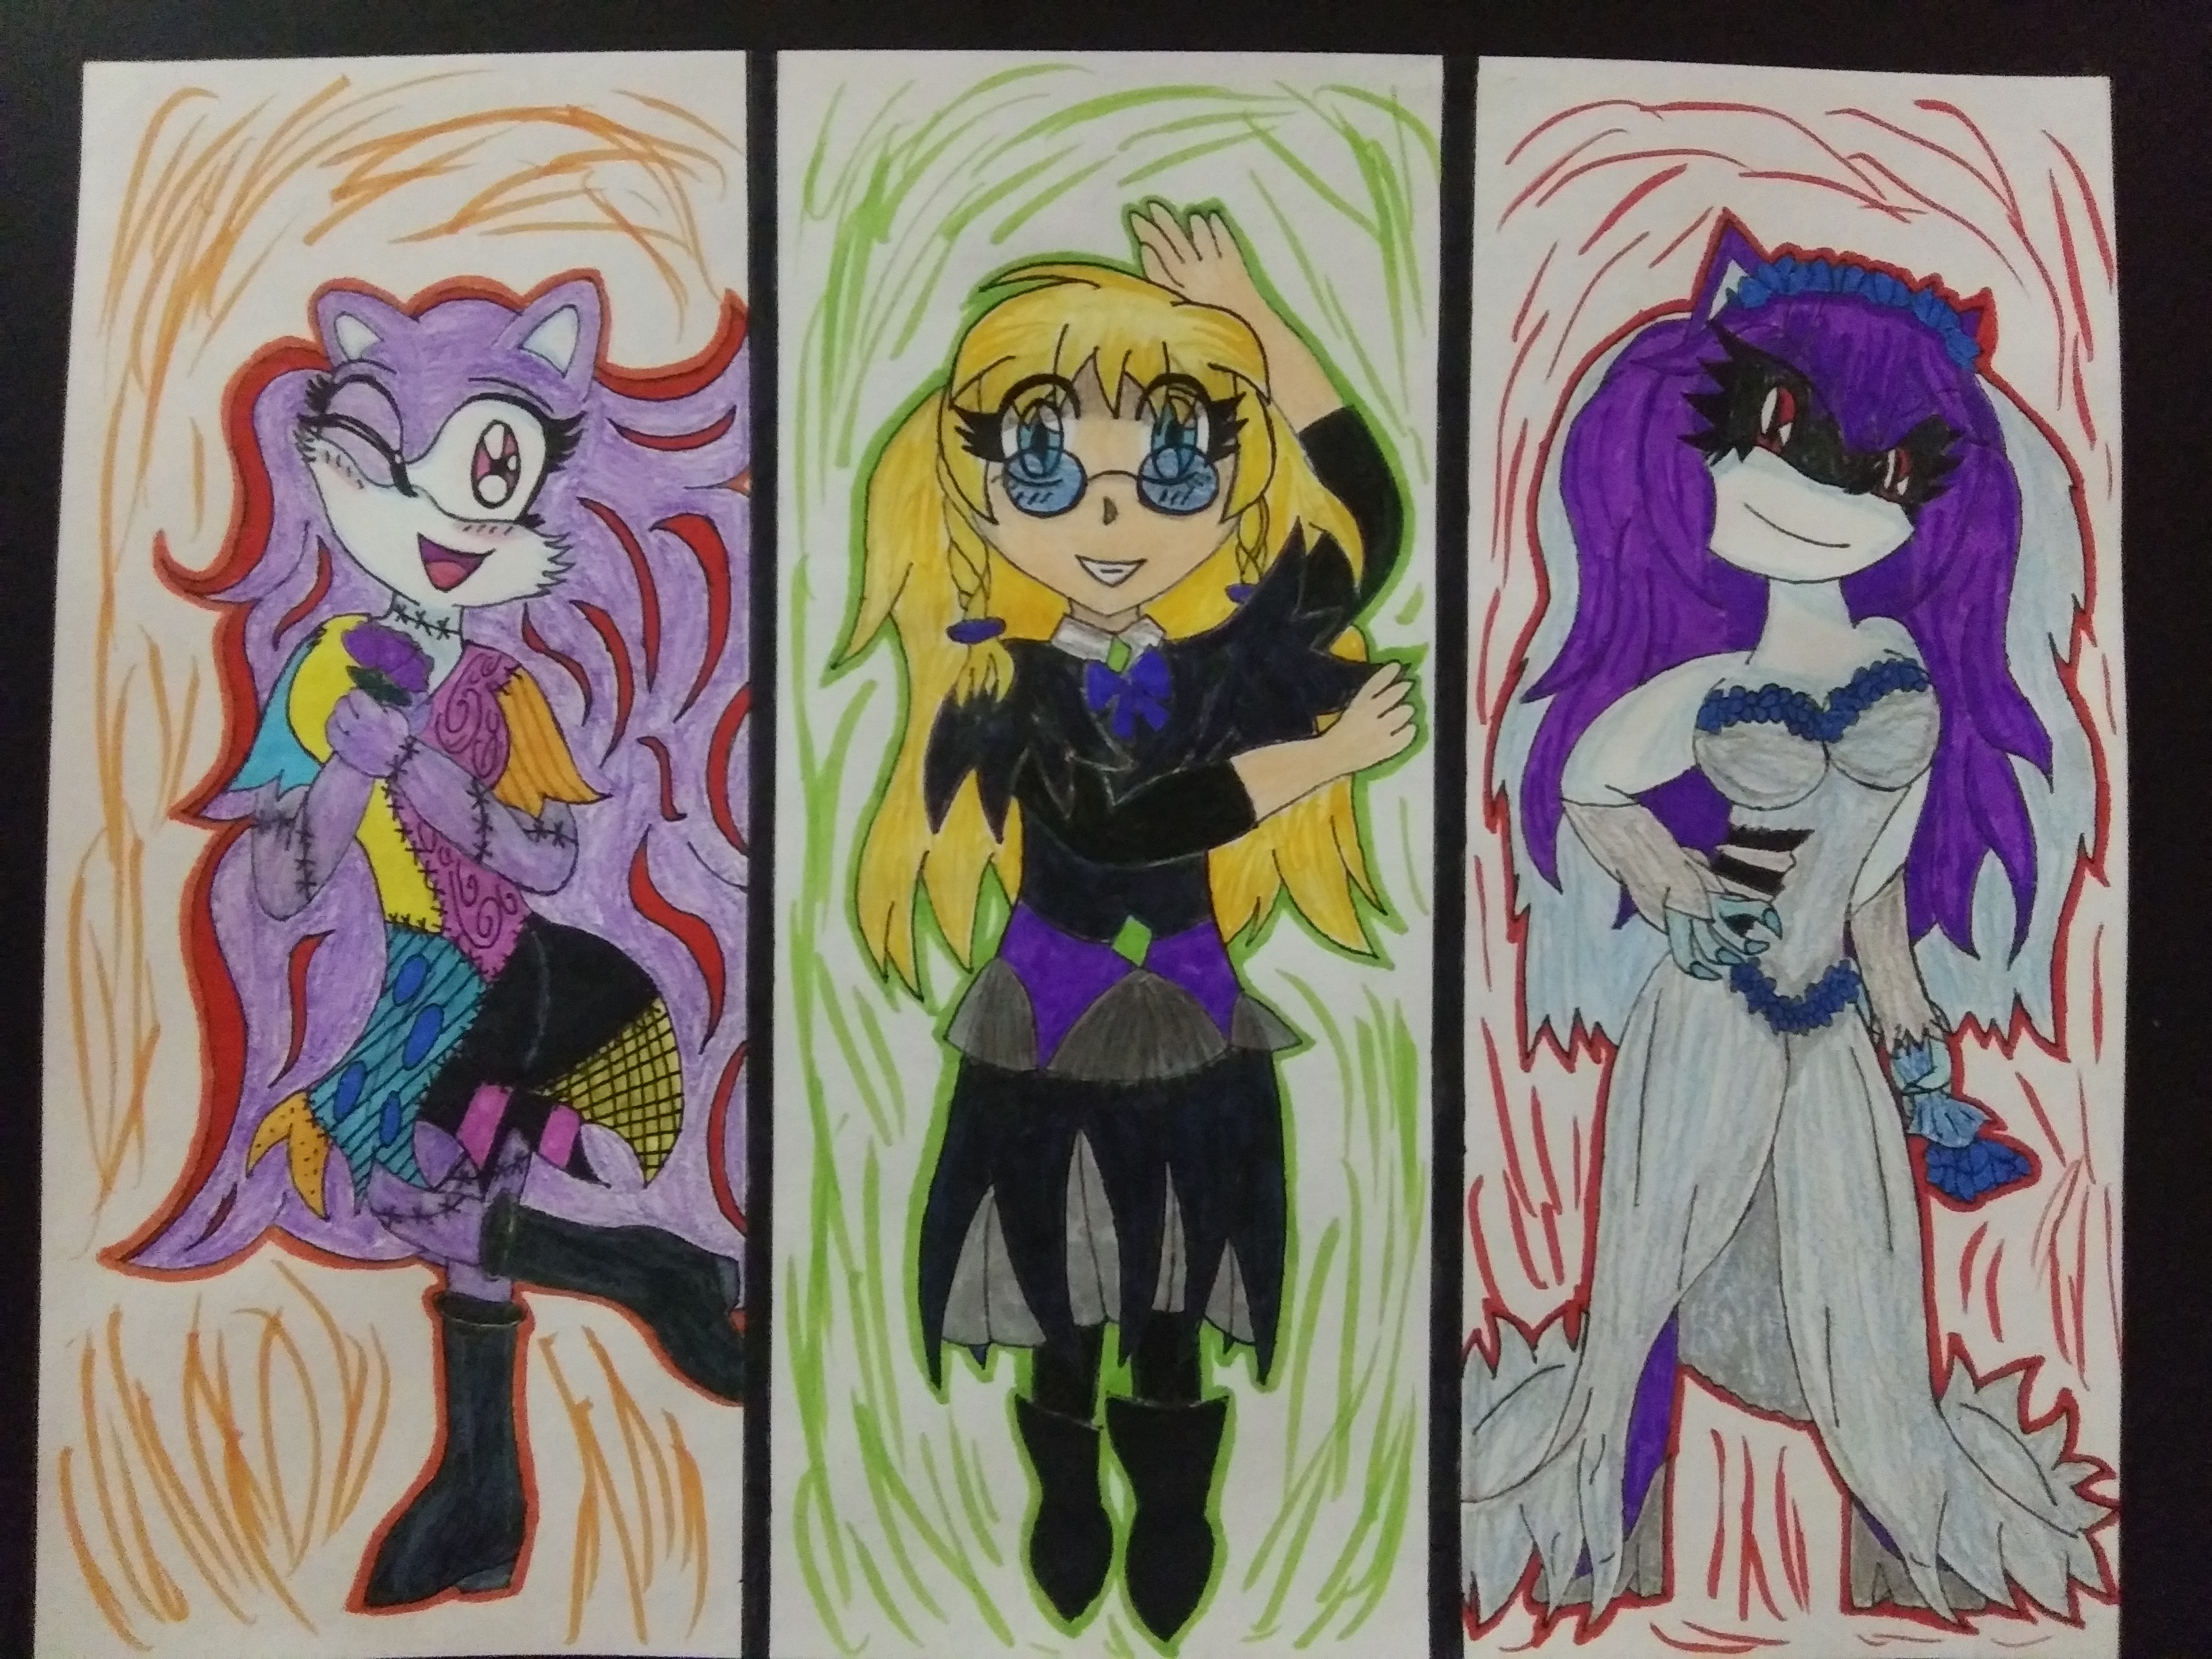 Spooky Month Characters!! Part 1 by Faith3231 on DeviantArt